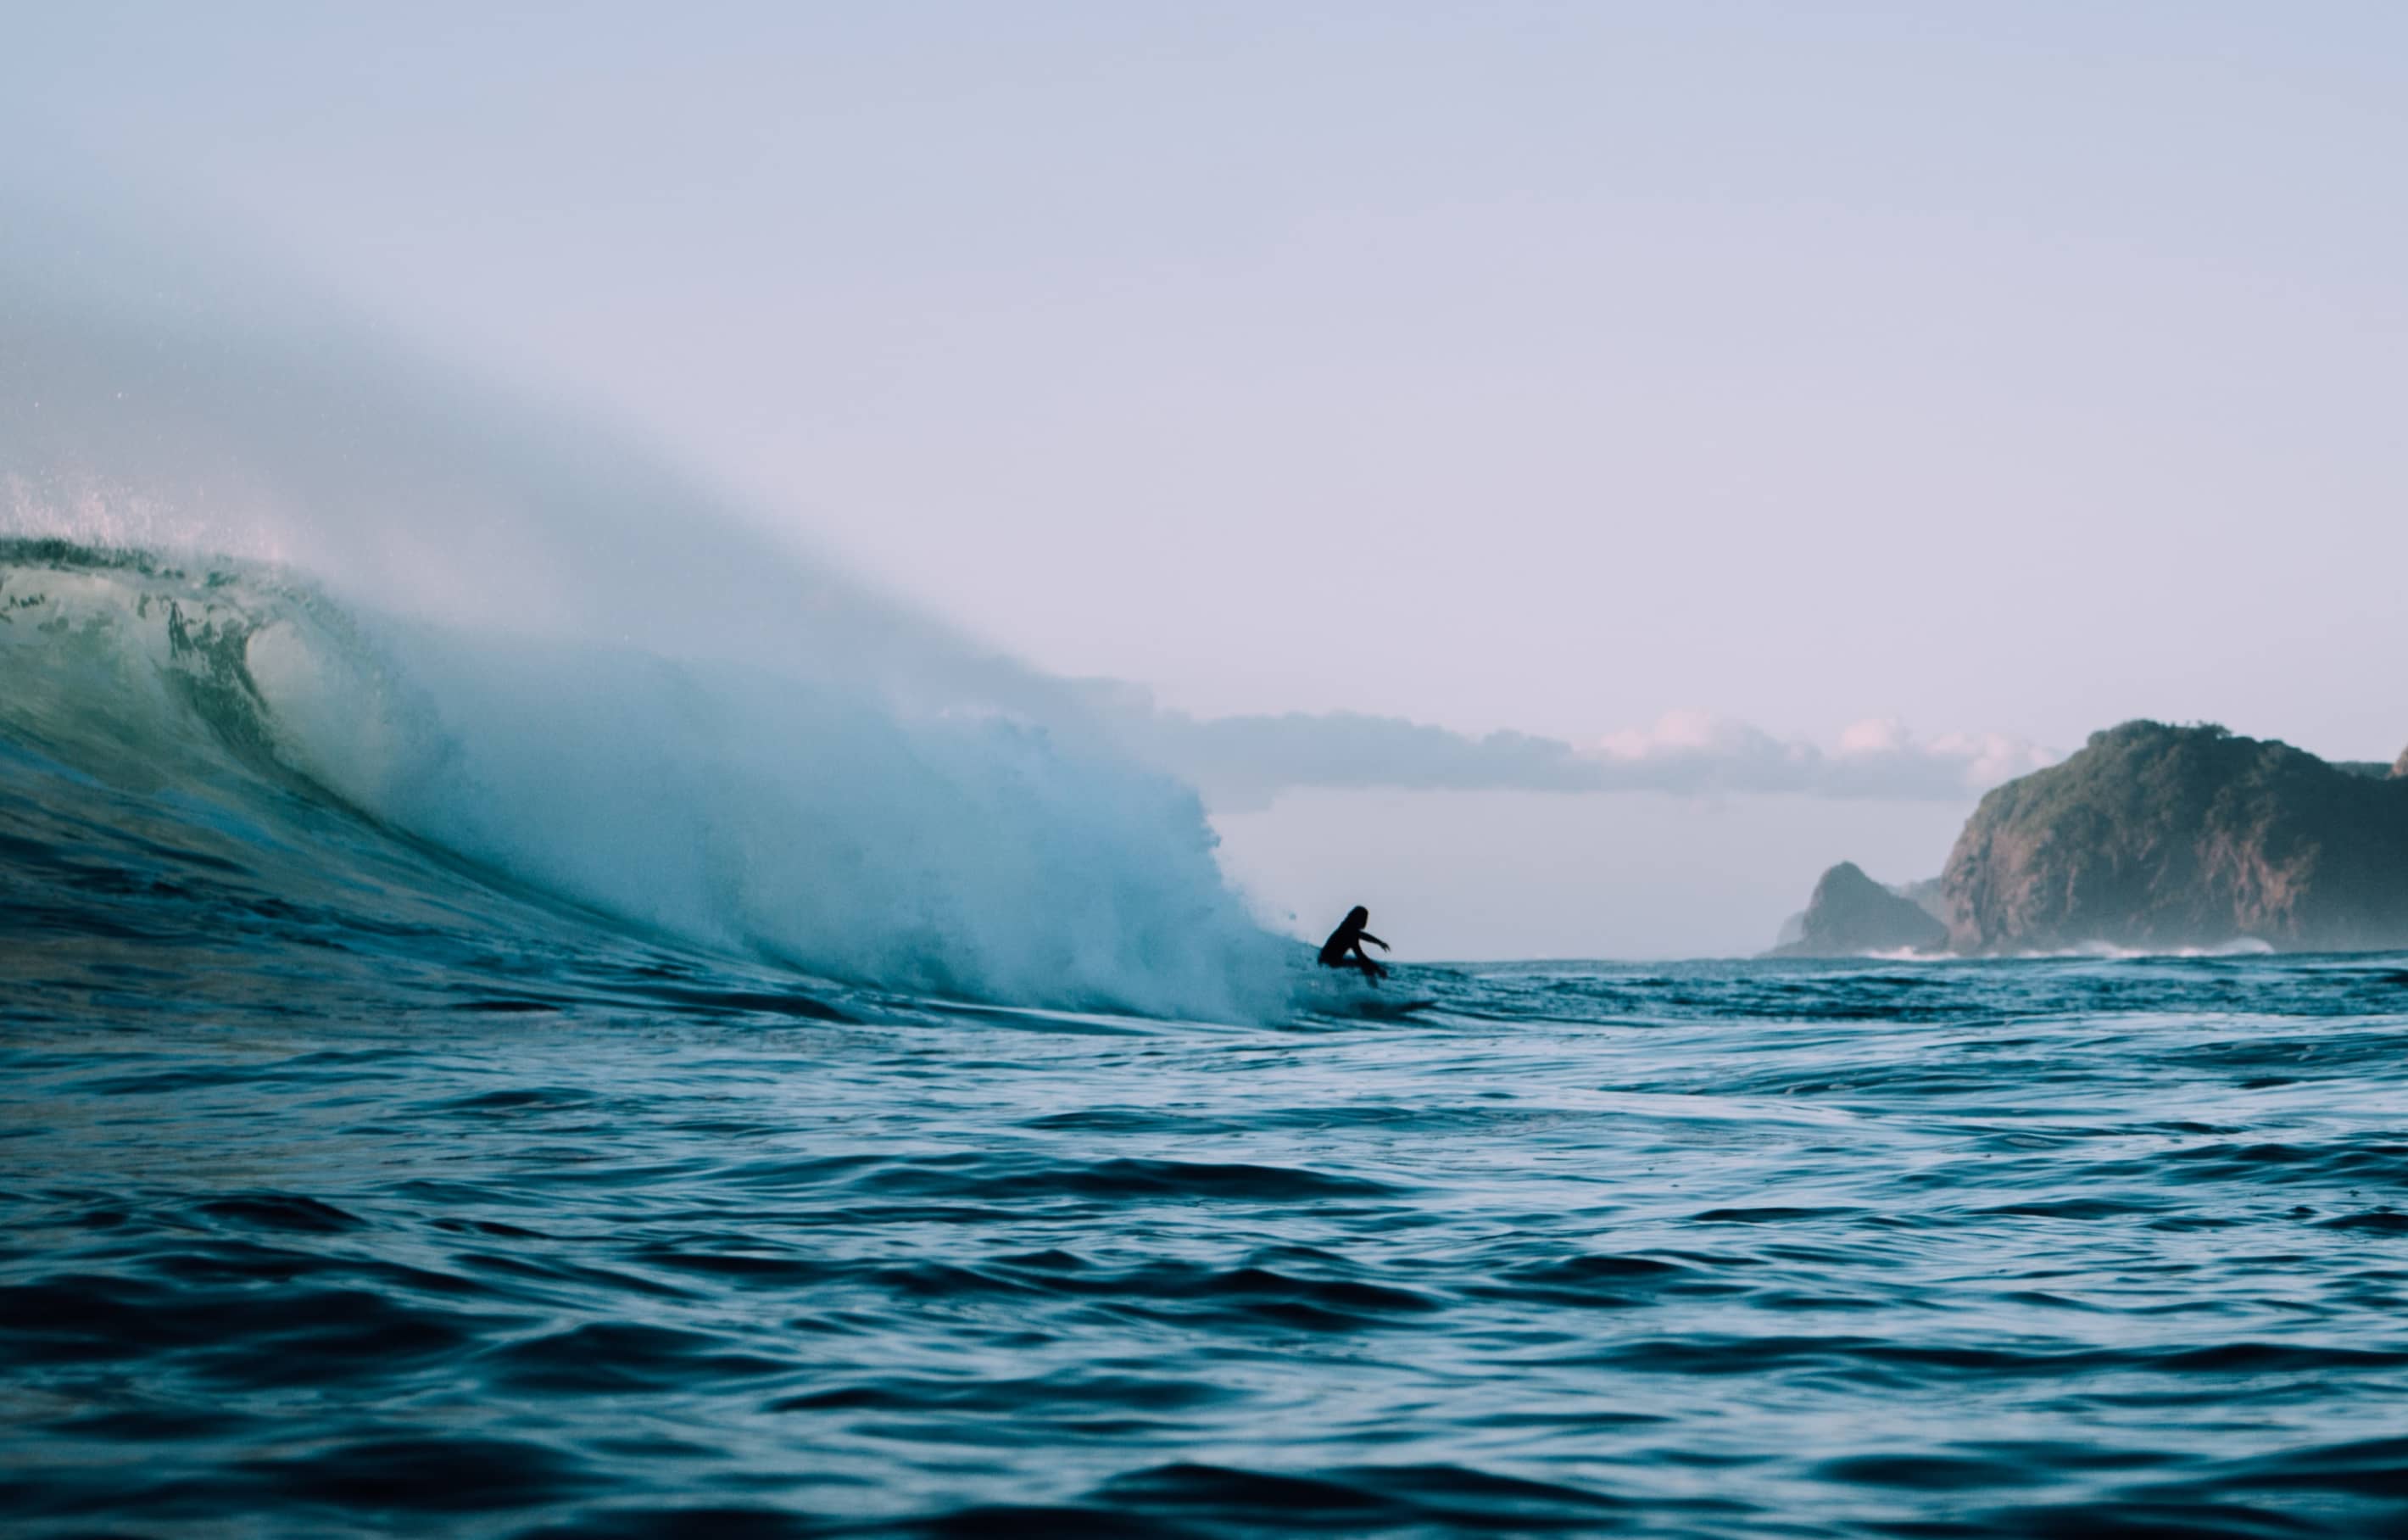 Banner image of a surfer in the ocean.